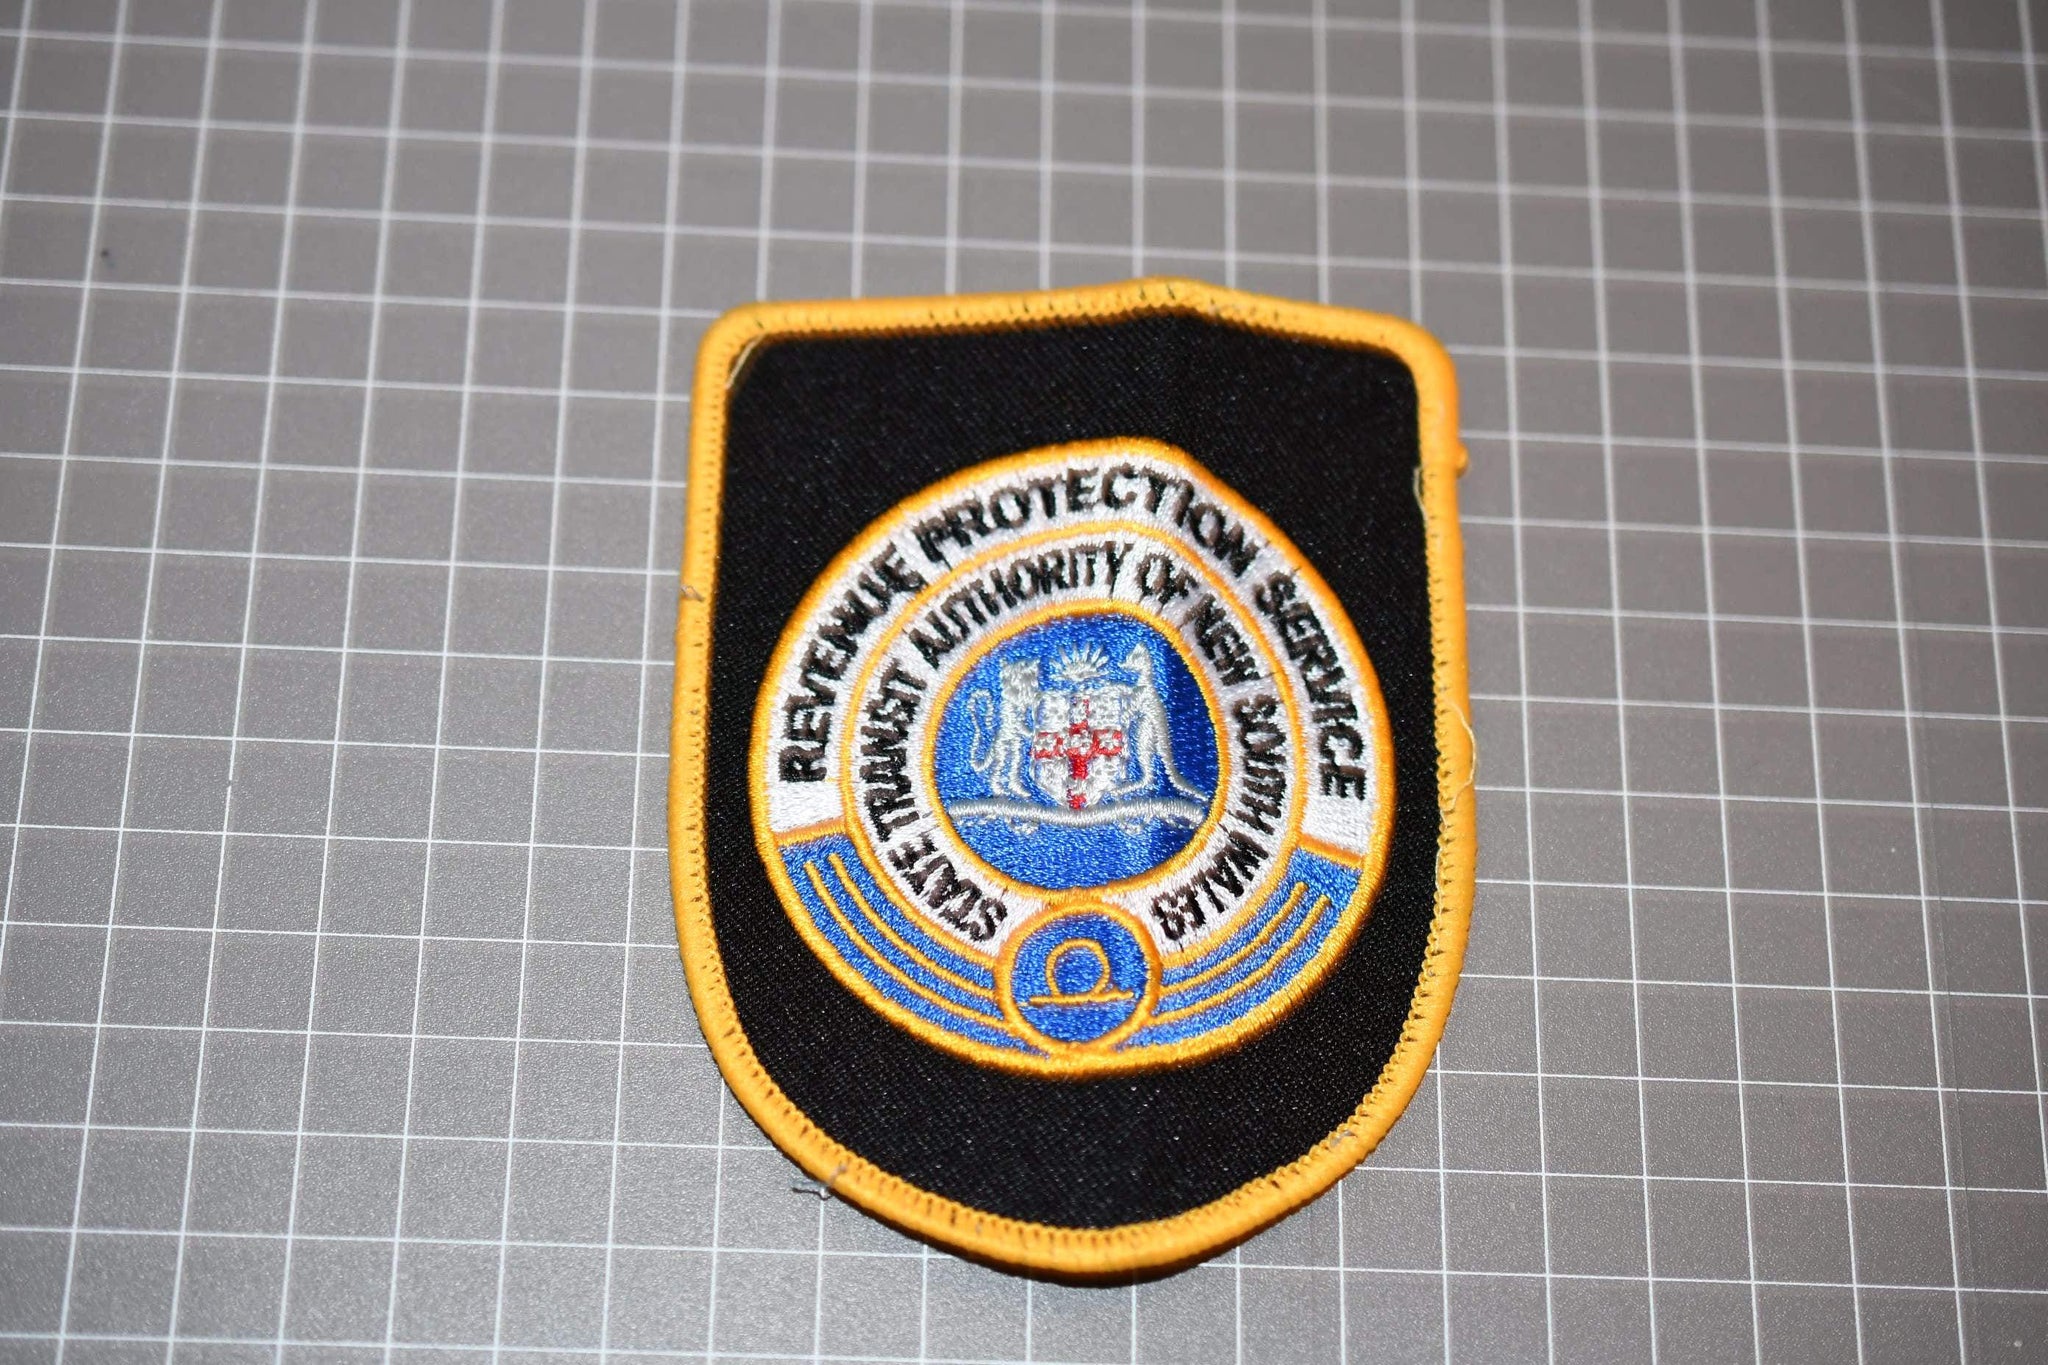 State Transit Authority Of NSW Revenue Protection Patch (B6)